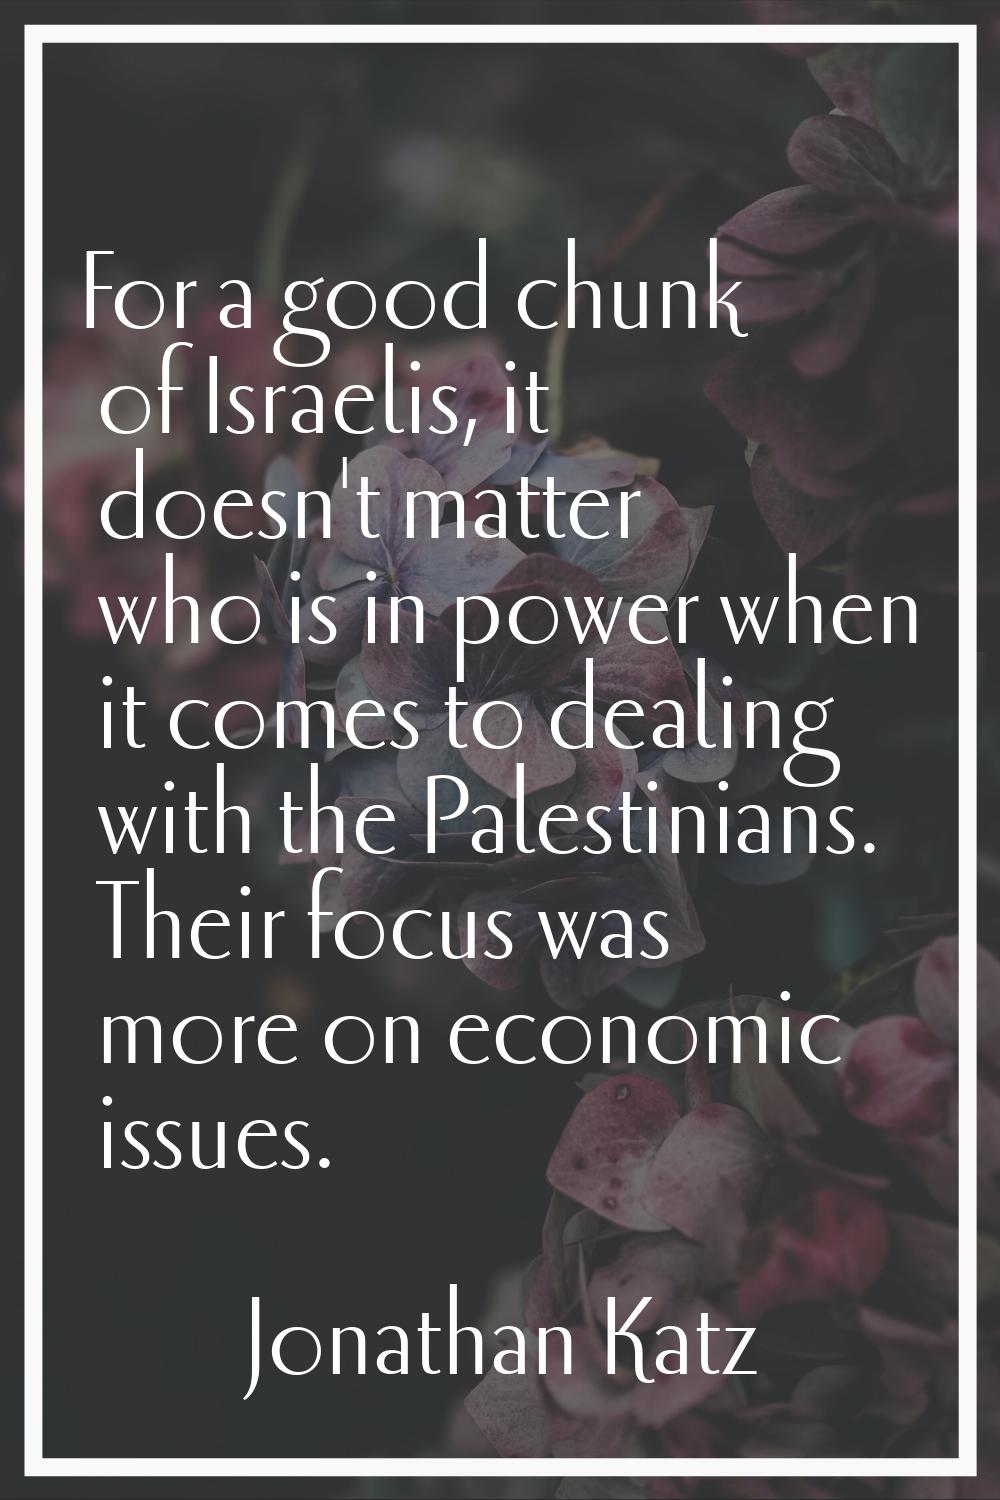 For a good chunk of Israelis, it doesn't matter who is in power when it comes to dealing with the P